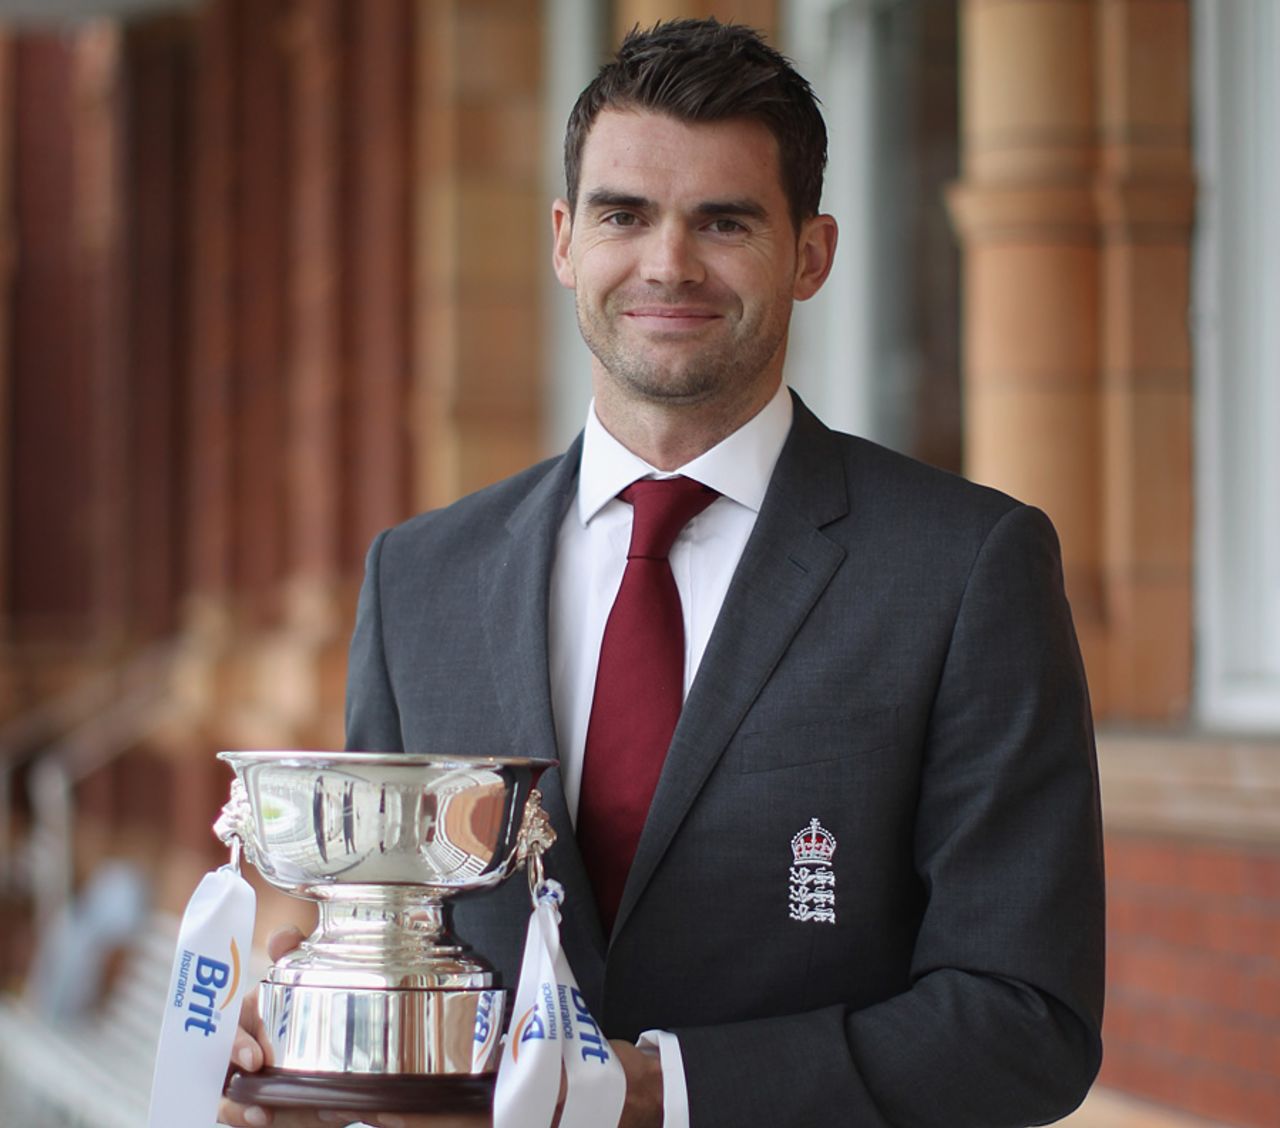 James Anderson was named England's Player of the Year, Lord's, May 14, 2012